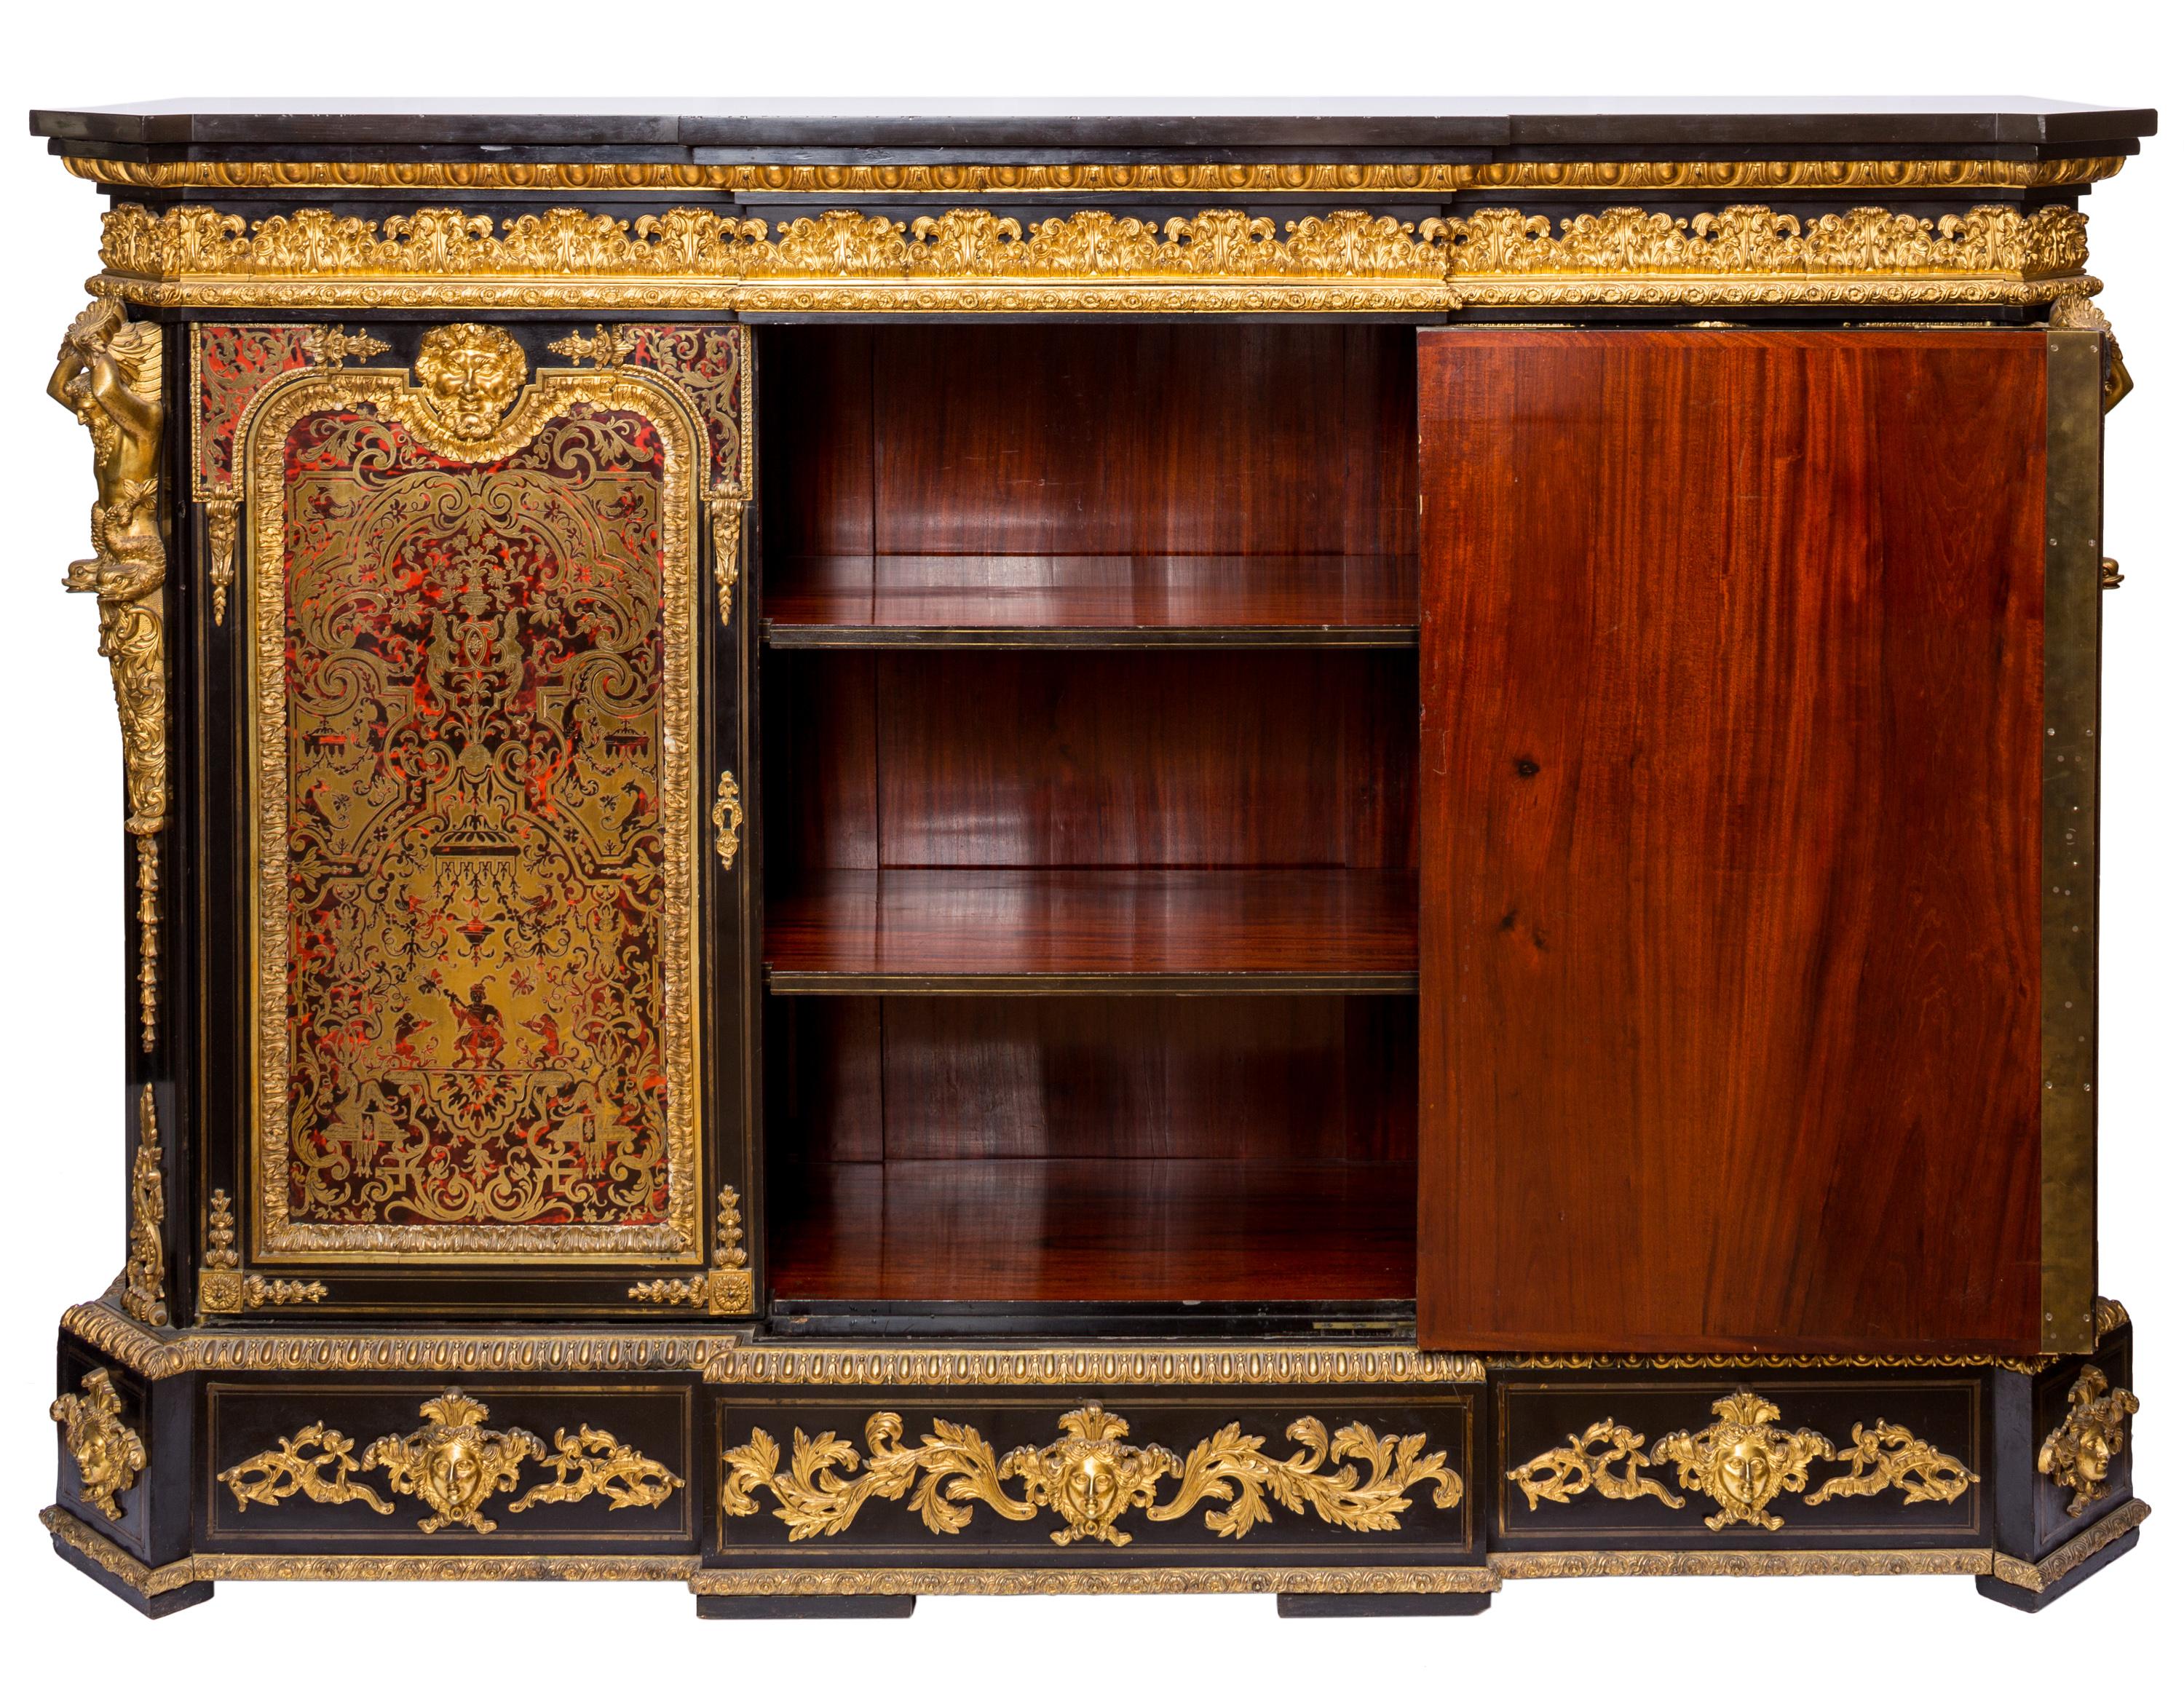 An opulent 19th century French Napoleon III (nephew of Bonaparte I) style commode, with Boulle style red-orange tortoiseshell and brass marquetry, ormolu detailing and marble top. The front features three highly decorative doors with panels of